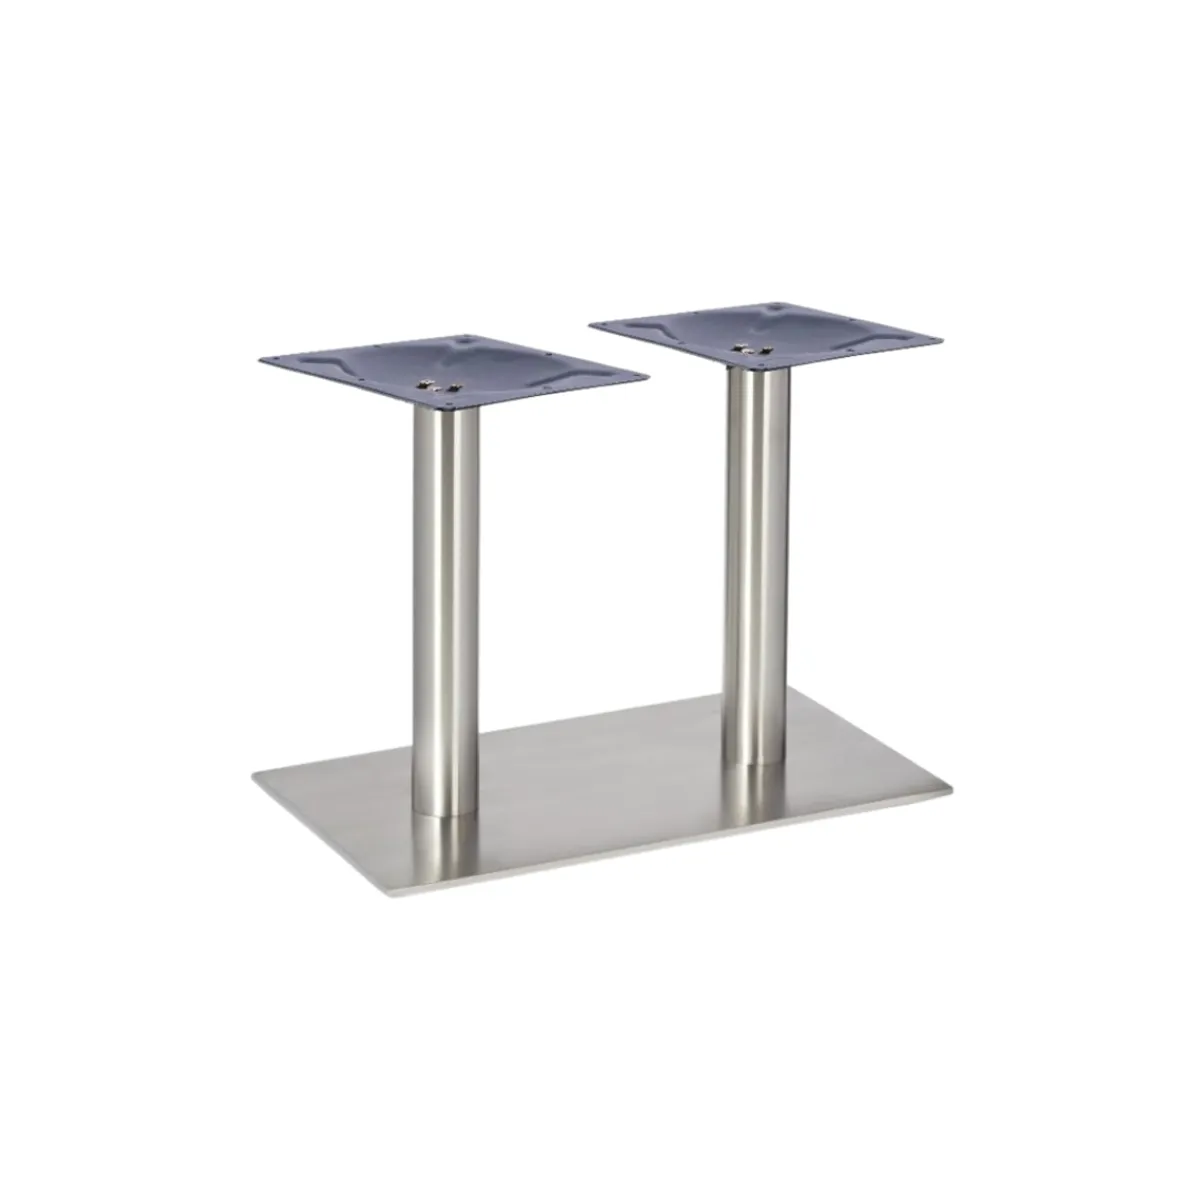 Flat twin rectangular table base with round columns 2